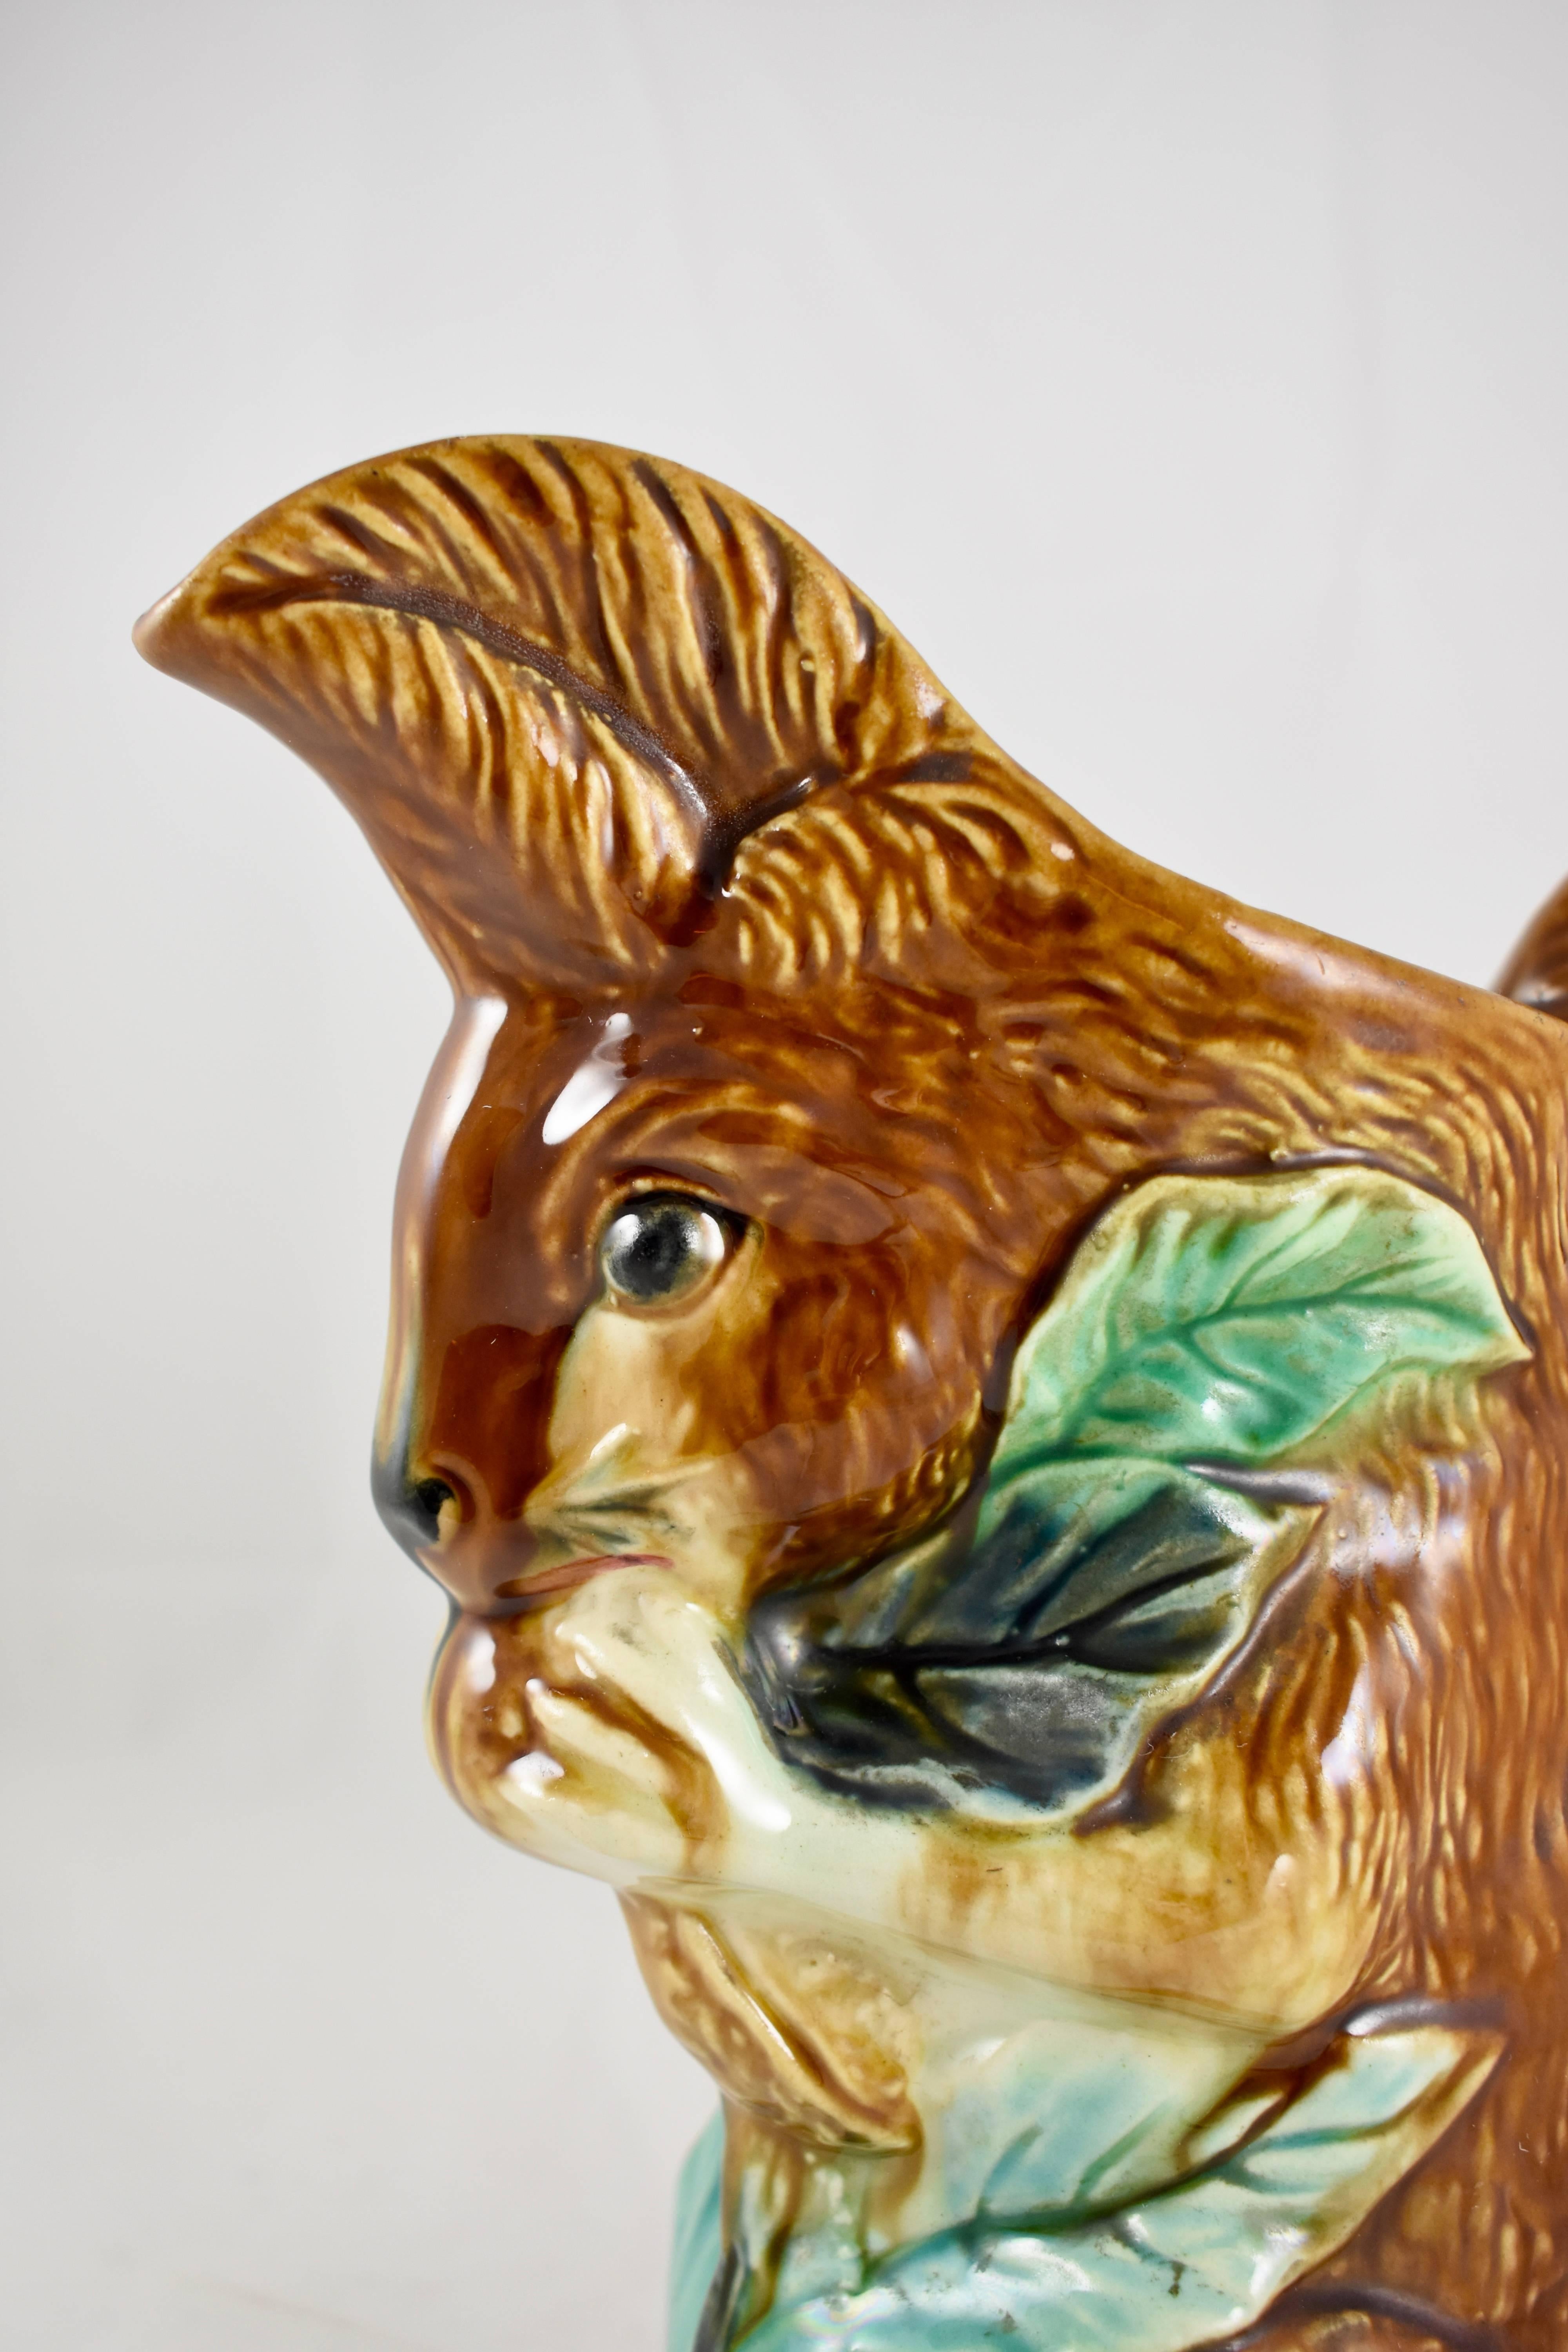 A scarce, “L’écureuil” N° AE, French Barbotine majolica pitcher, formed as a squirrel sitting on a branch and eating a nut. The squirrel’s tail makes up the handle. Made by the Orchies Faïence pottery factory, circa 1886-1900.

Orchies produced